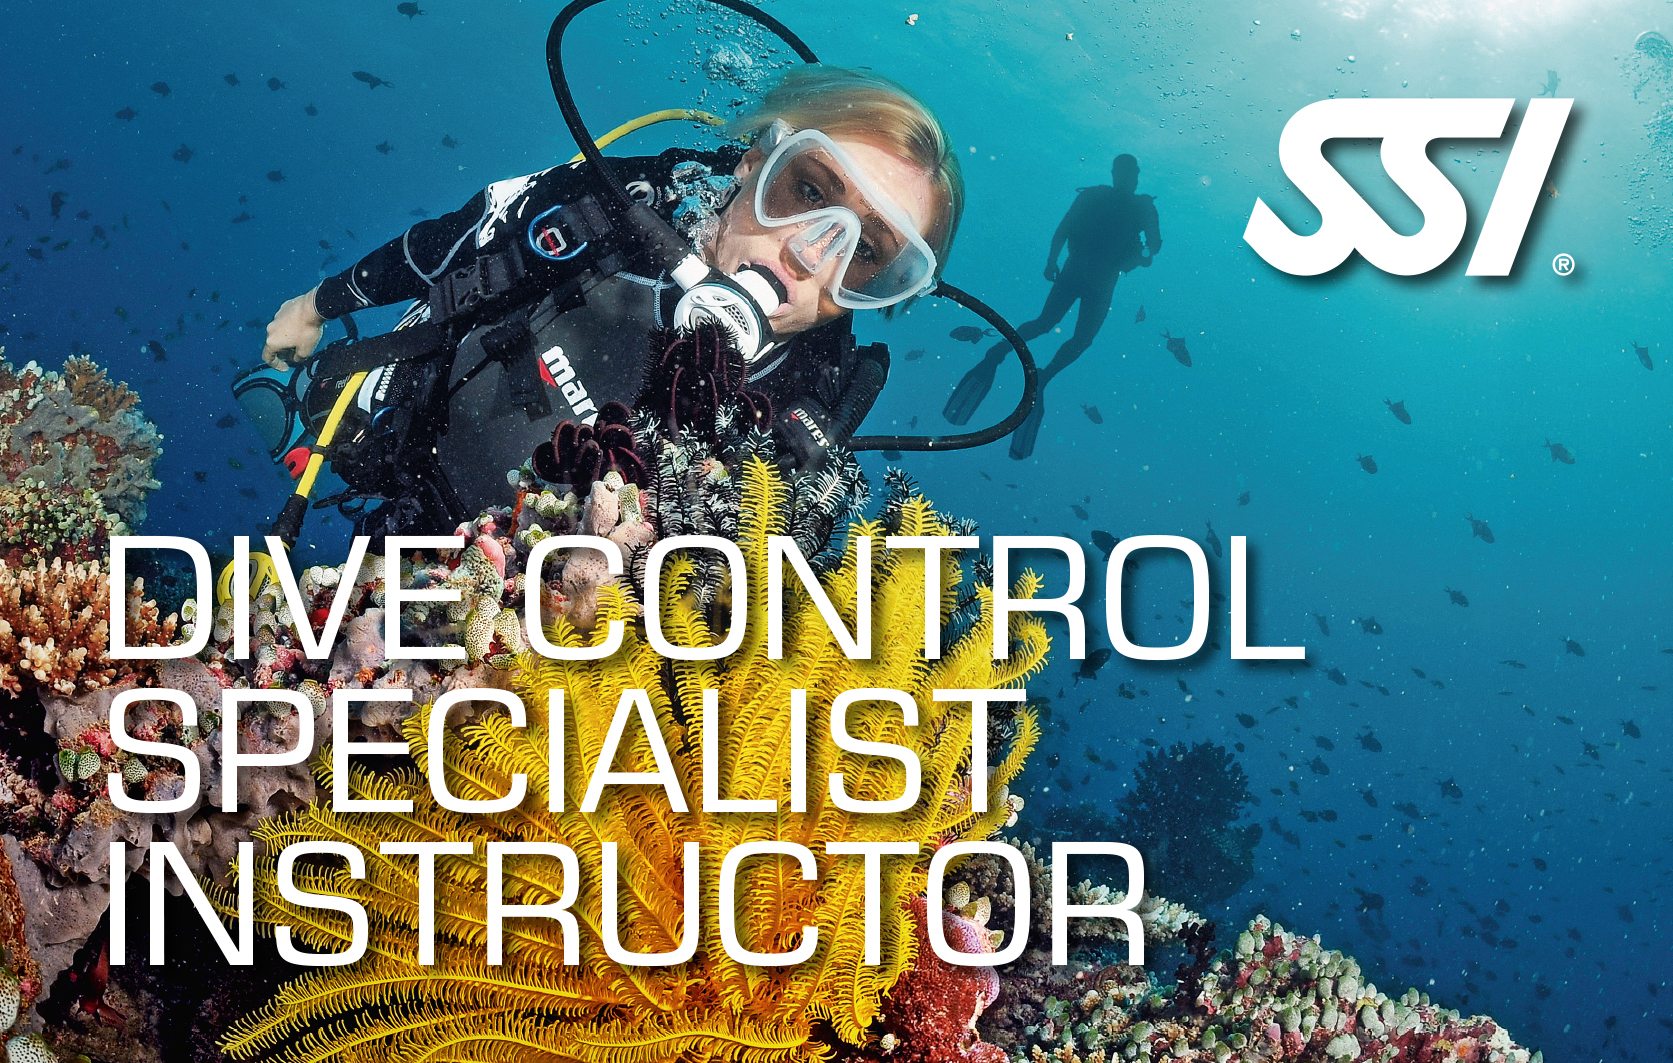 SSI Dive Control Specialist Instructor Course | SSI Dive Control Specialist Instructorr | Dive Control Specialist Instructor | Diving Course